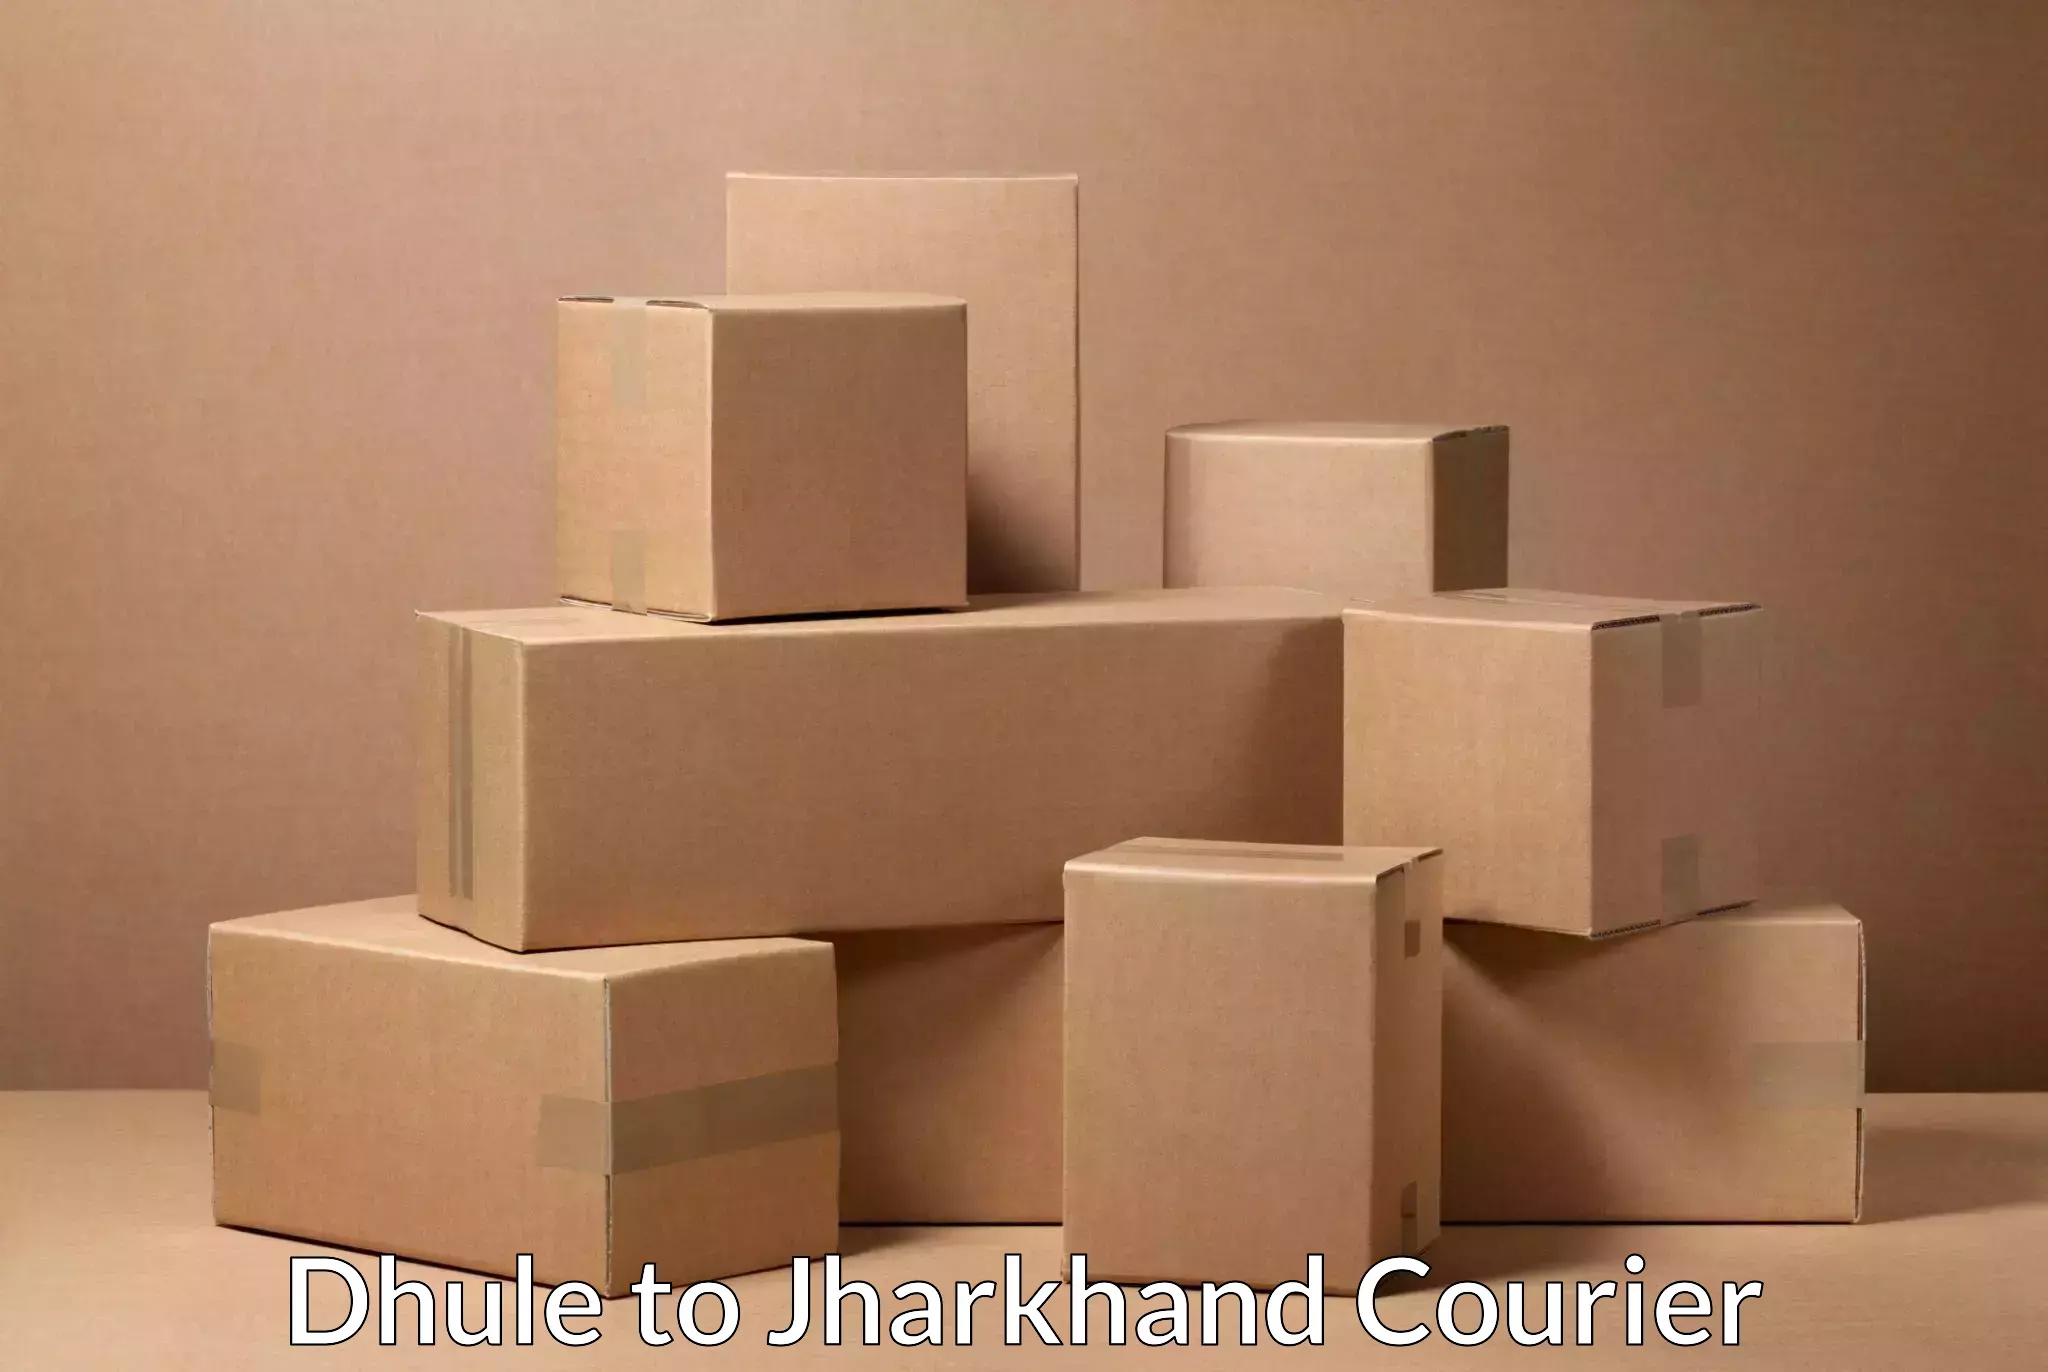 Efficient package consolidation Dhule to Jharkhand